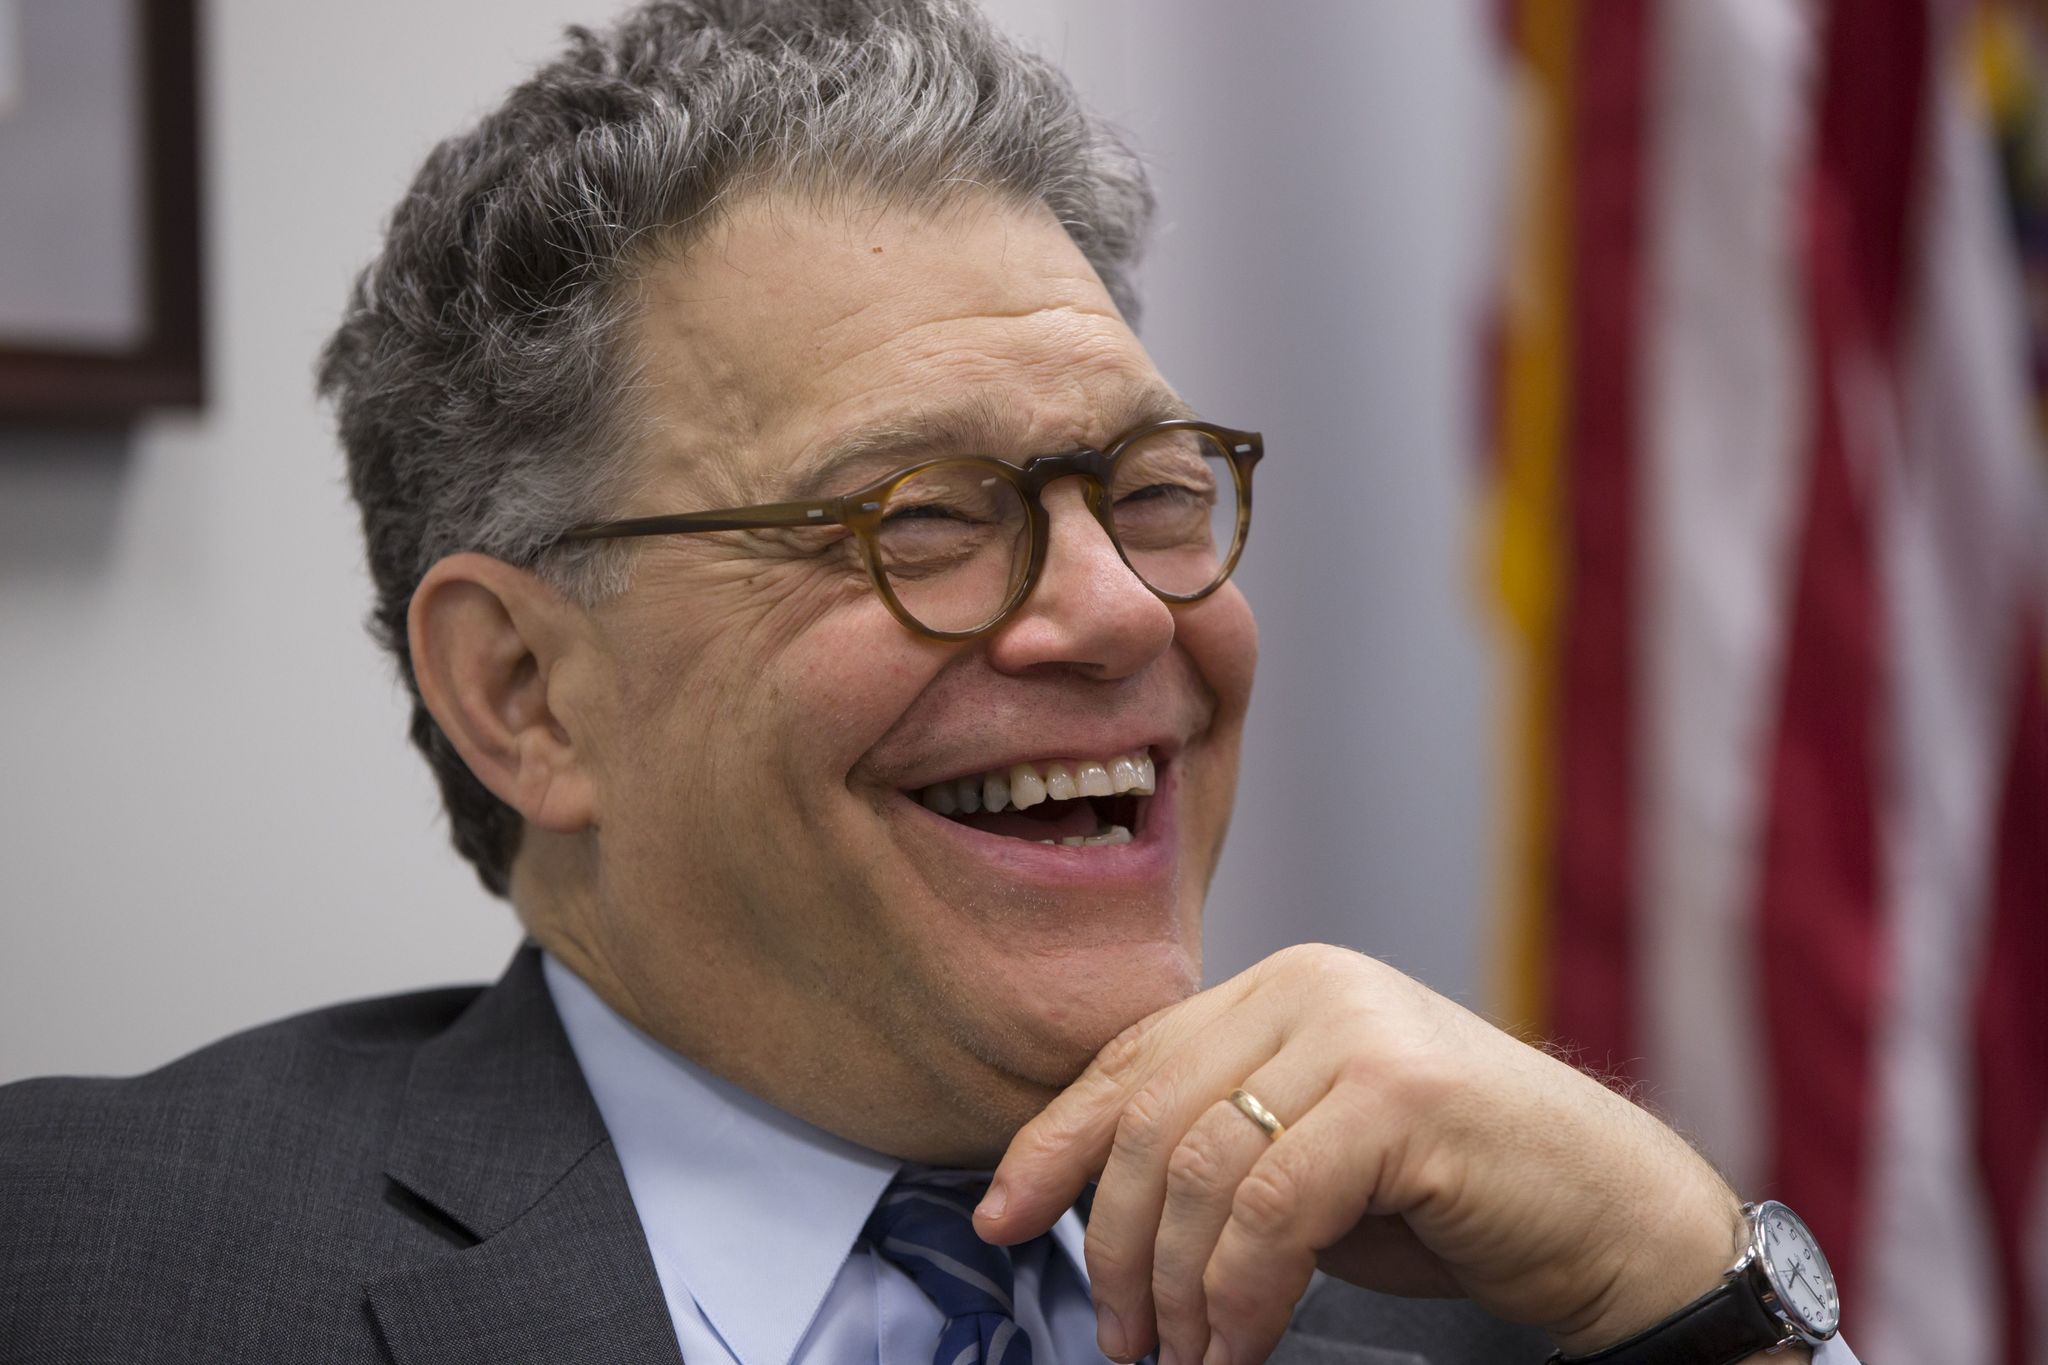 Sen. Al Franken, D-Minn., laughs as he meets with students from the Close Up program from St. Michael-Albertville High School in St. Michael, Minnesota, on Capitol Hill on Wednesday. For years, Franken has kept one of his most potent political weapons in check: his wit. The former “Saturday Night Live” comic was determined to establish himself as a serious senator after winning his Minnesota seat by a razor-thin margin. So after getting to the Senate in 2009 he embraced the low-key life of a freshman lawmaker.